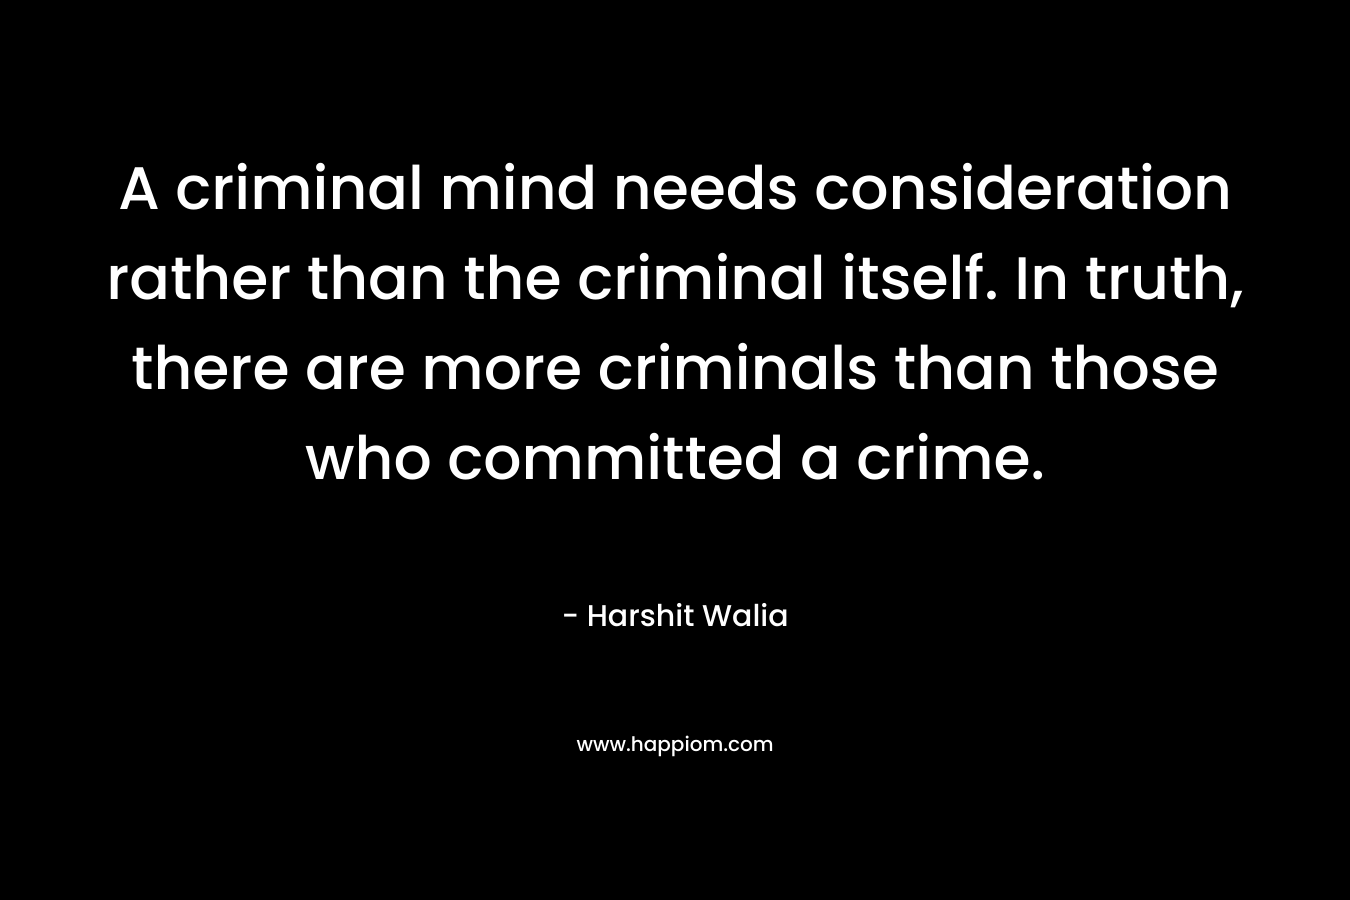 A criminal mind needs consideration rather than the criminal itself. In truth, there are more criminals than those who committed a crime.